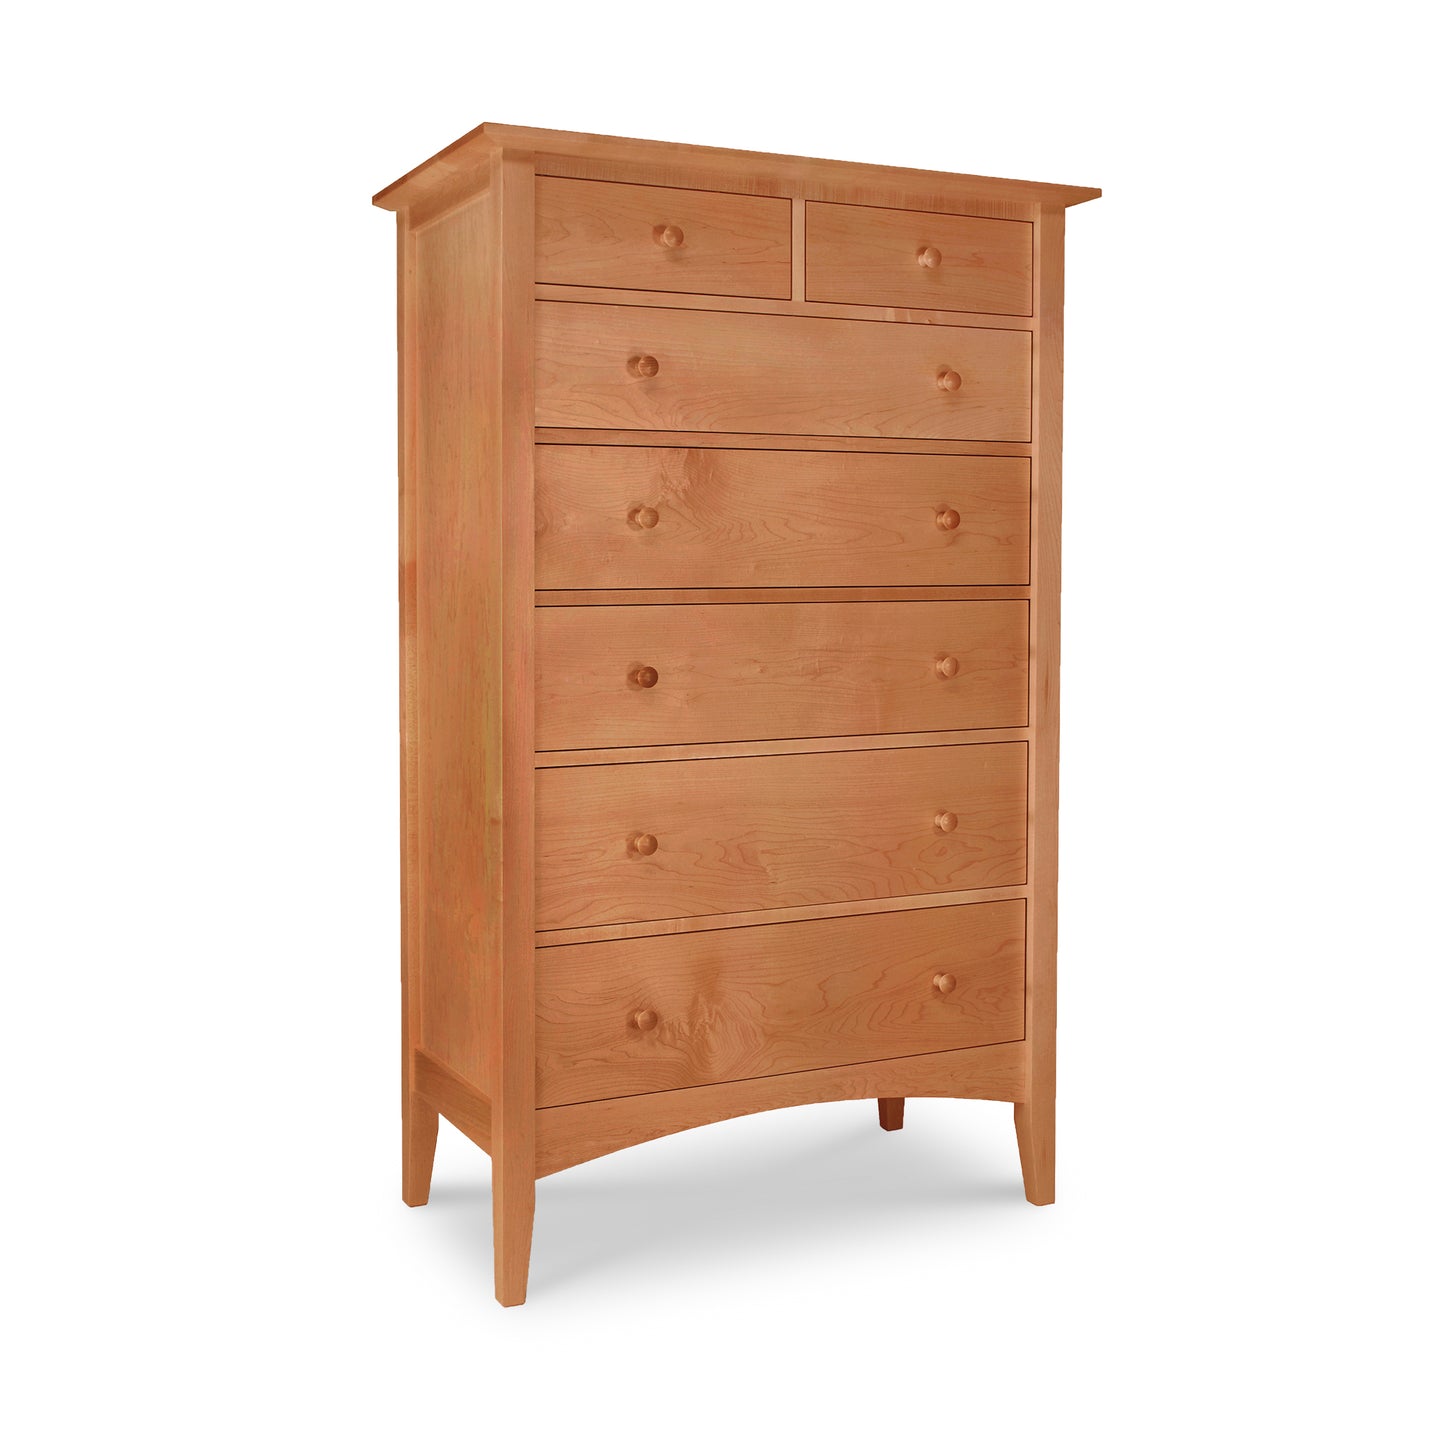 A Maple Corner Woodworks American Shaker 7-Drawer Chest on a white background.